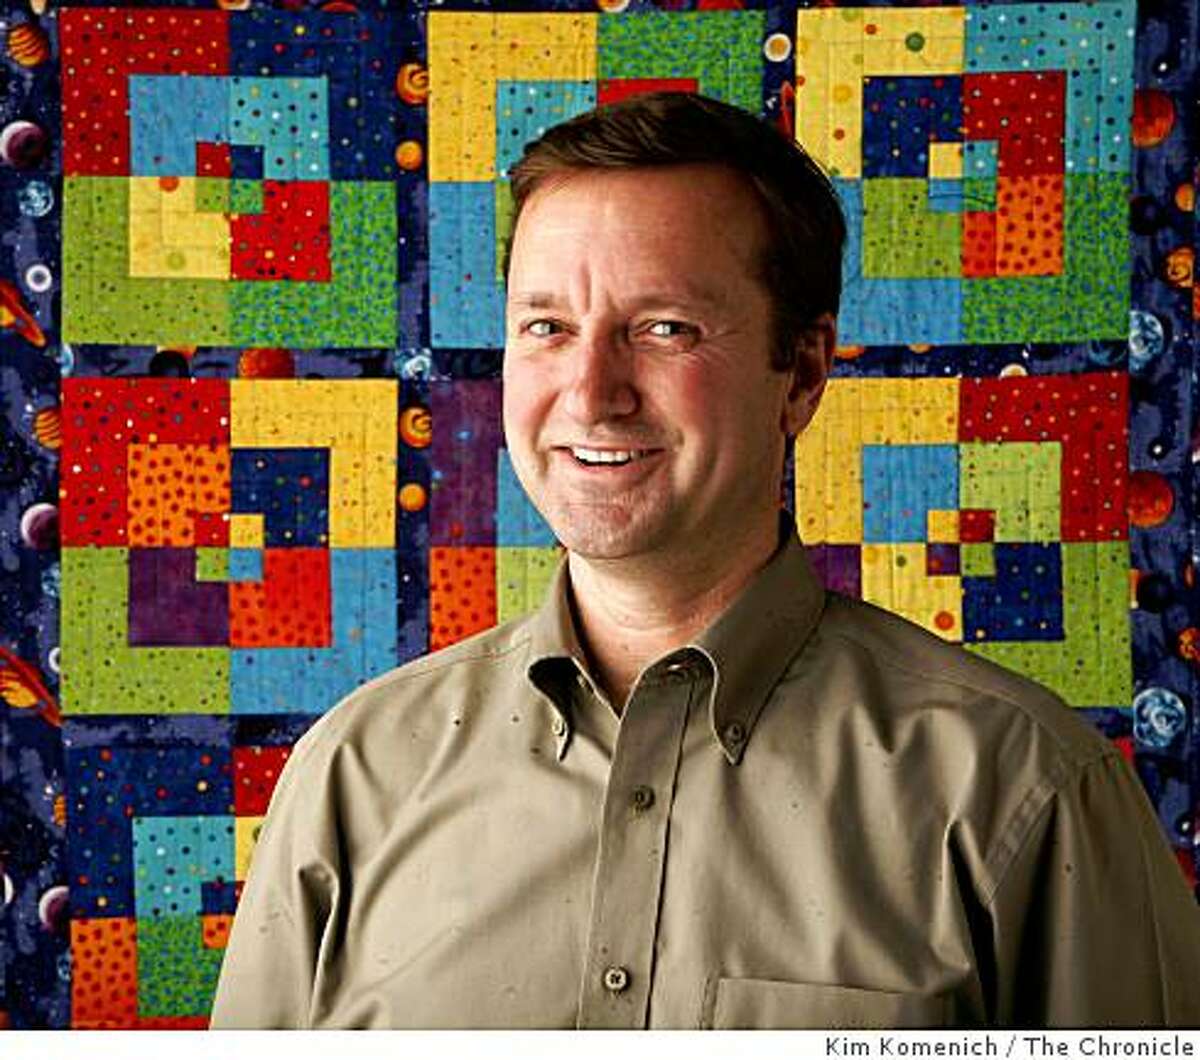 Jim Hahn of San Francisco, Calif., uses algebra to figure out how to proportionally up- and down-size the patterns in the quilts he makes. He is photographed with some of his creations in San Francisco on Wednesday, Aug. 20, 2008.